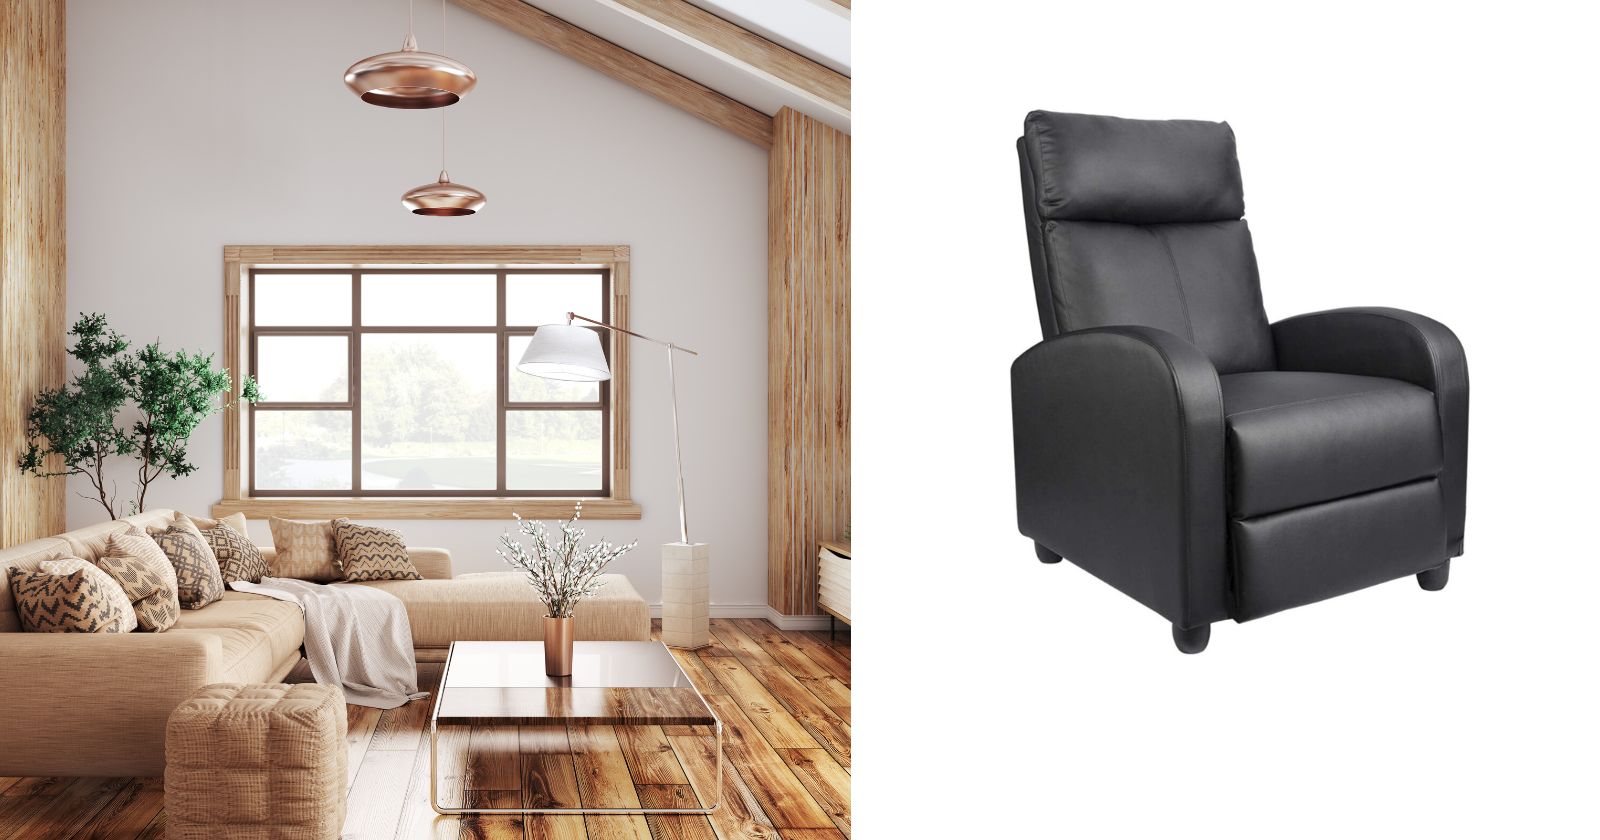 Homall Recliner Chair Review – Best Manual Recliner on the Market?